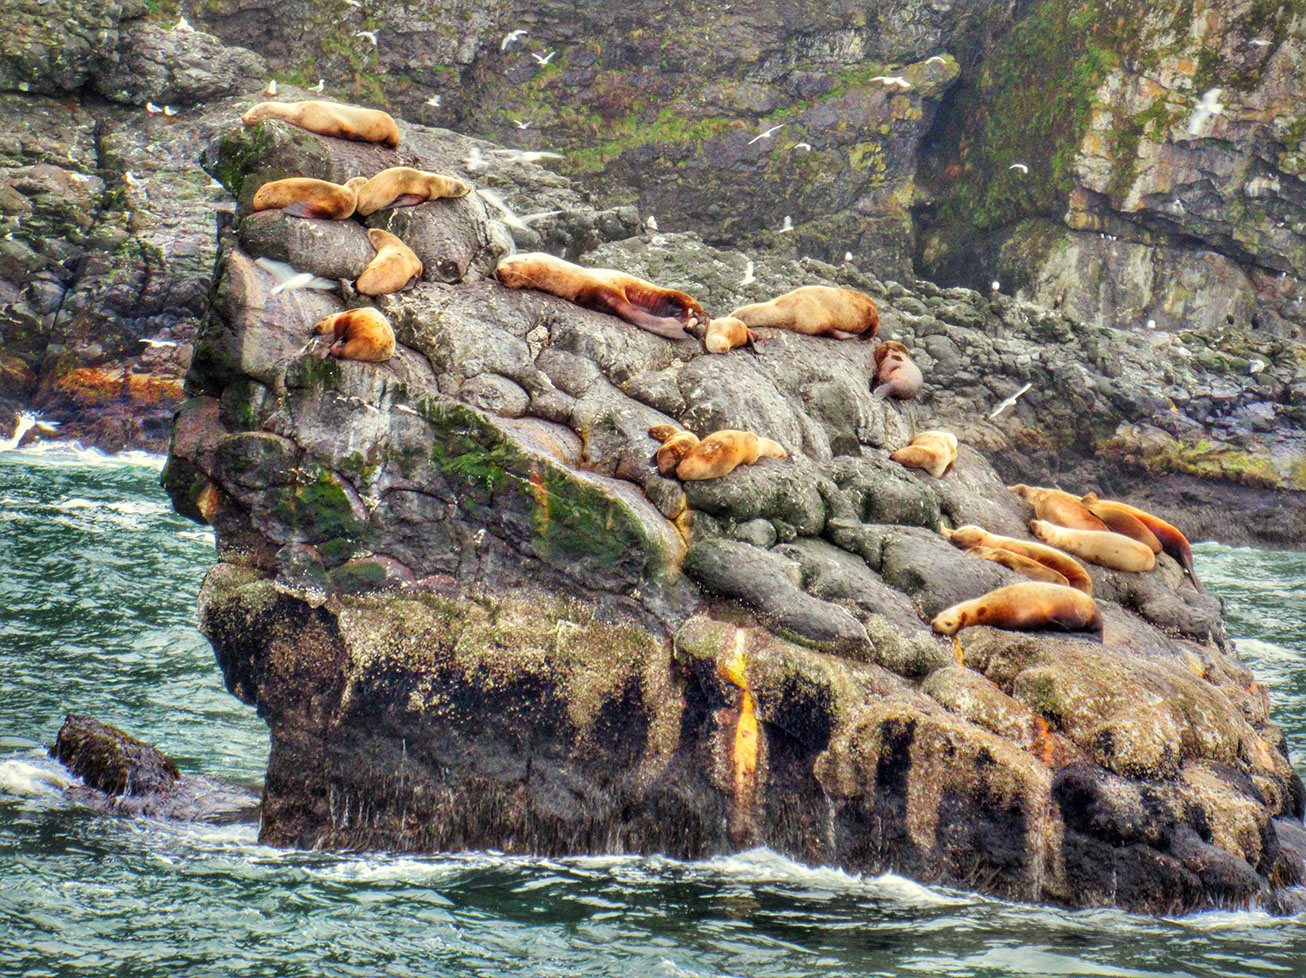 Sea lions spotted while on the Kenai Fjords Wildlife Cruise in Alaska